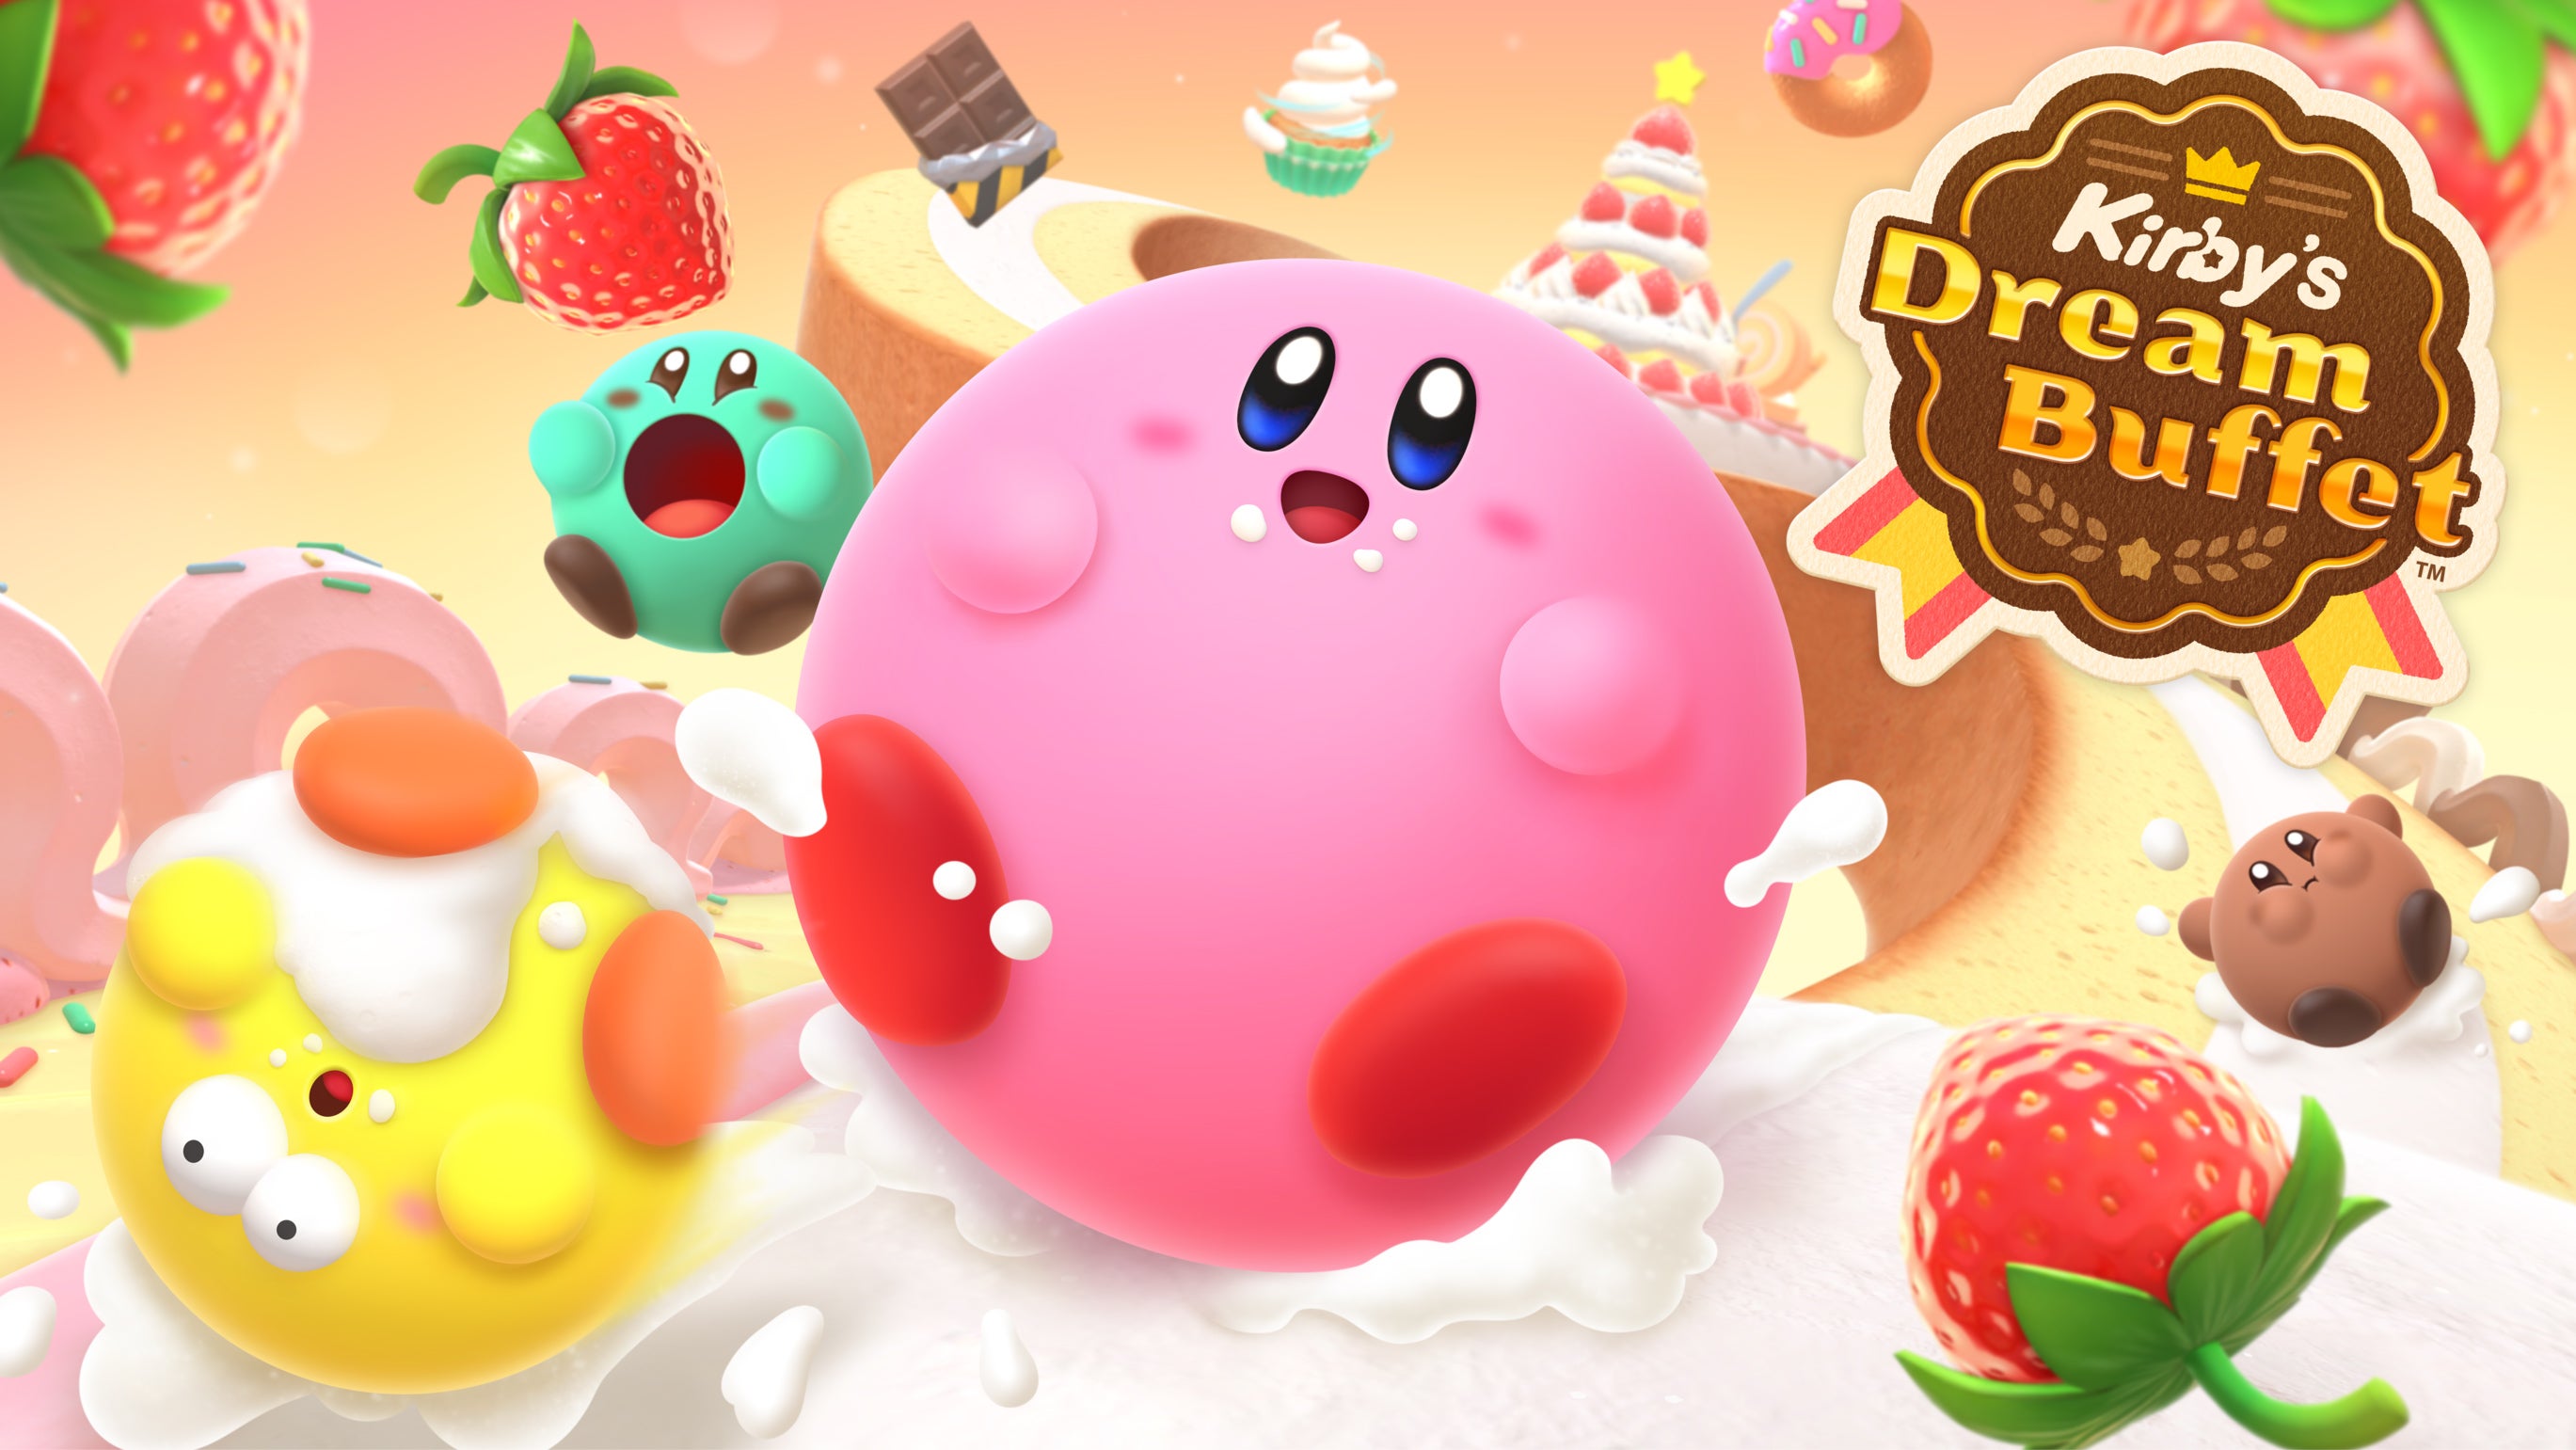 Image for Kirby’s Dream Buffet rolls onto Nintendo Switch this summer